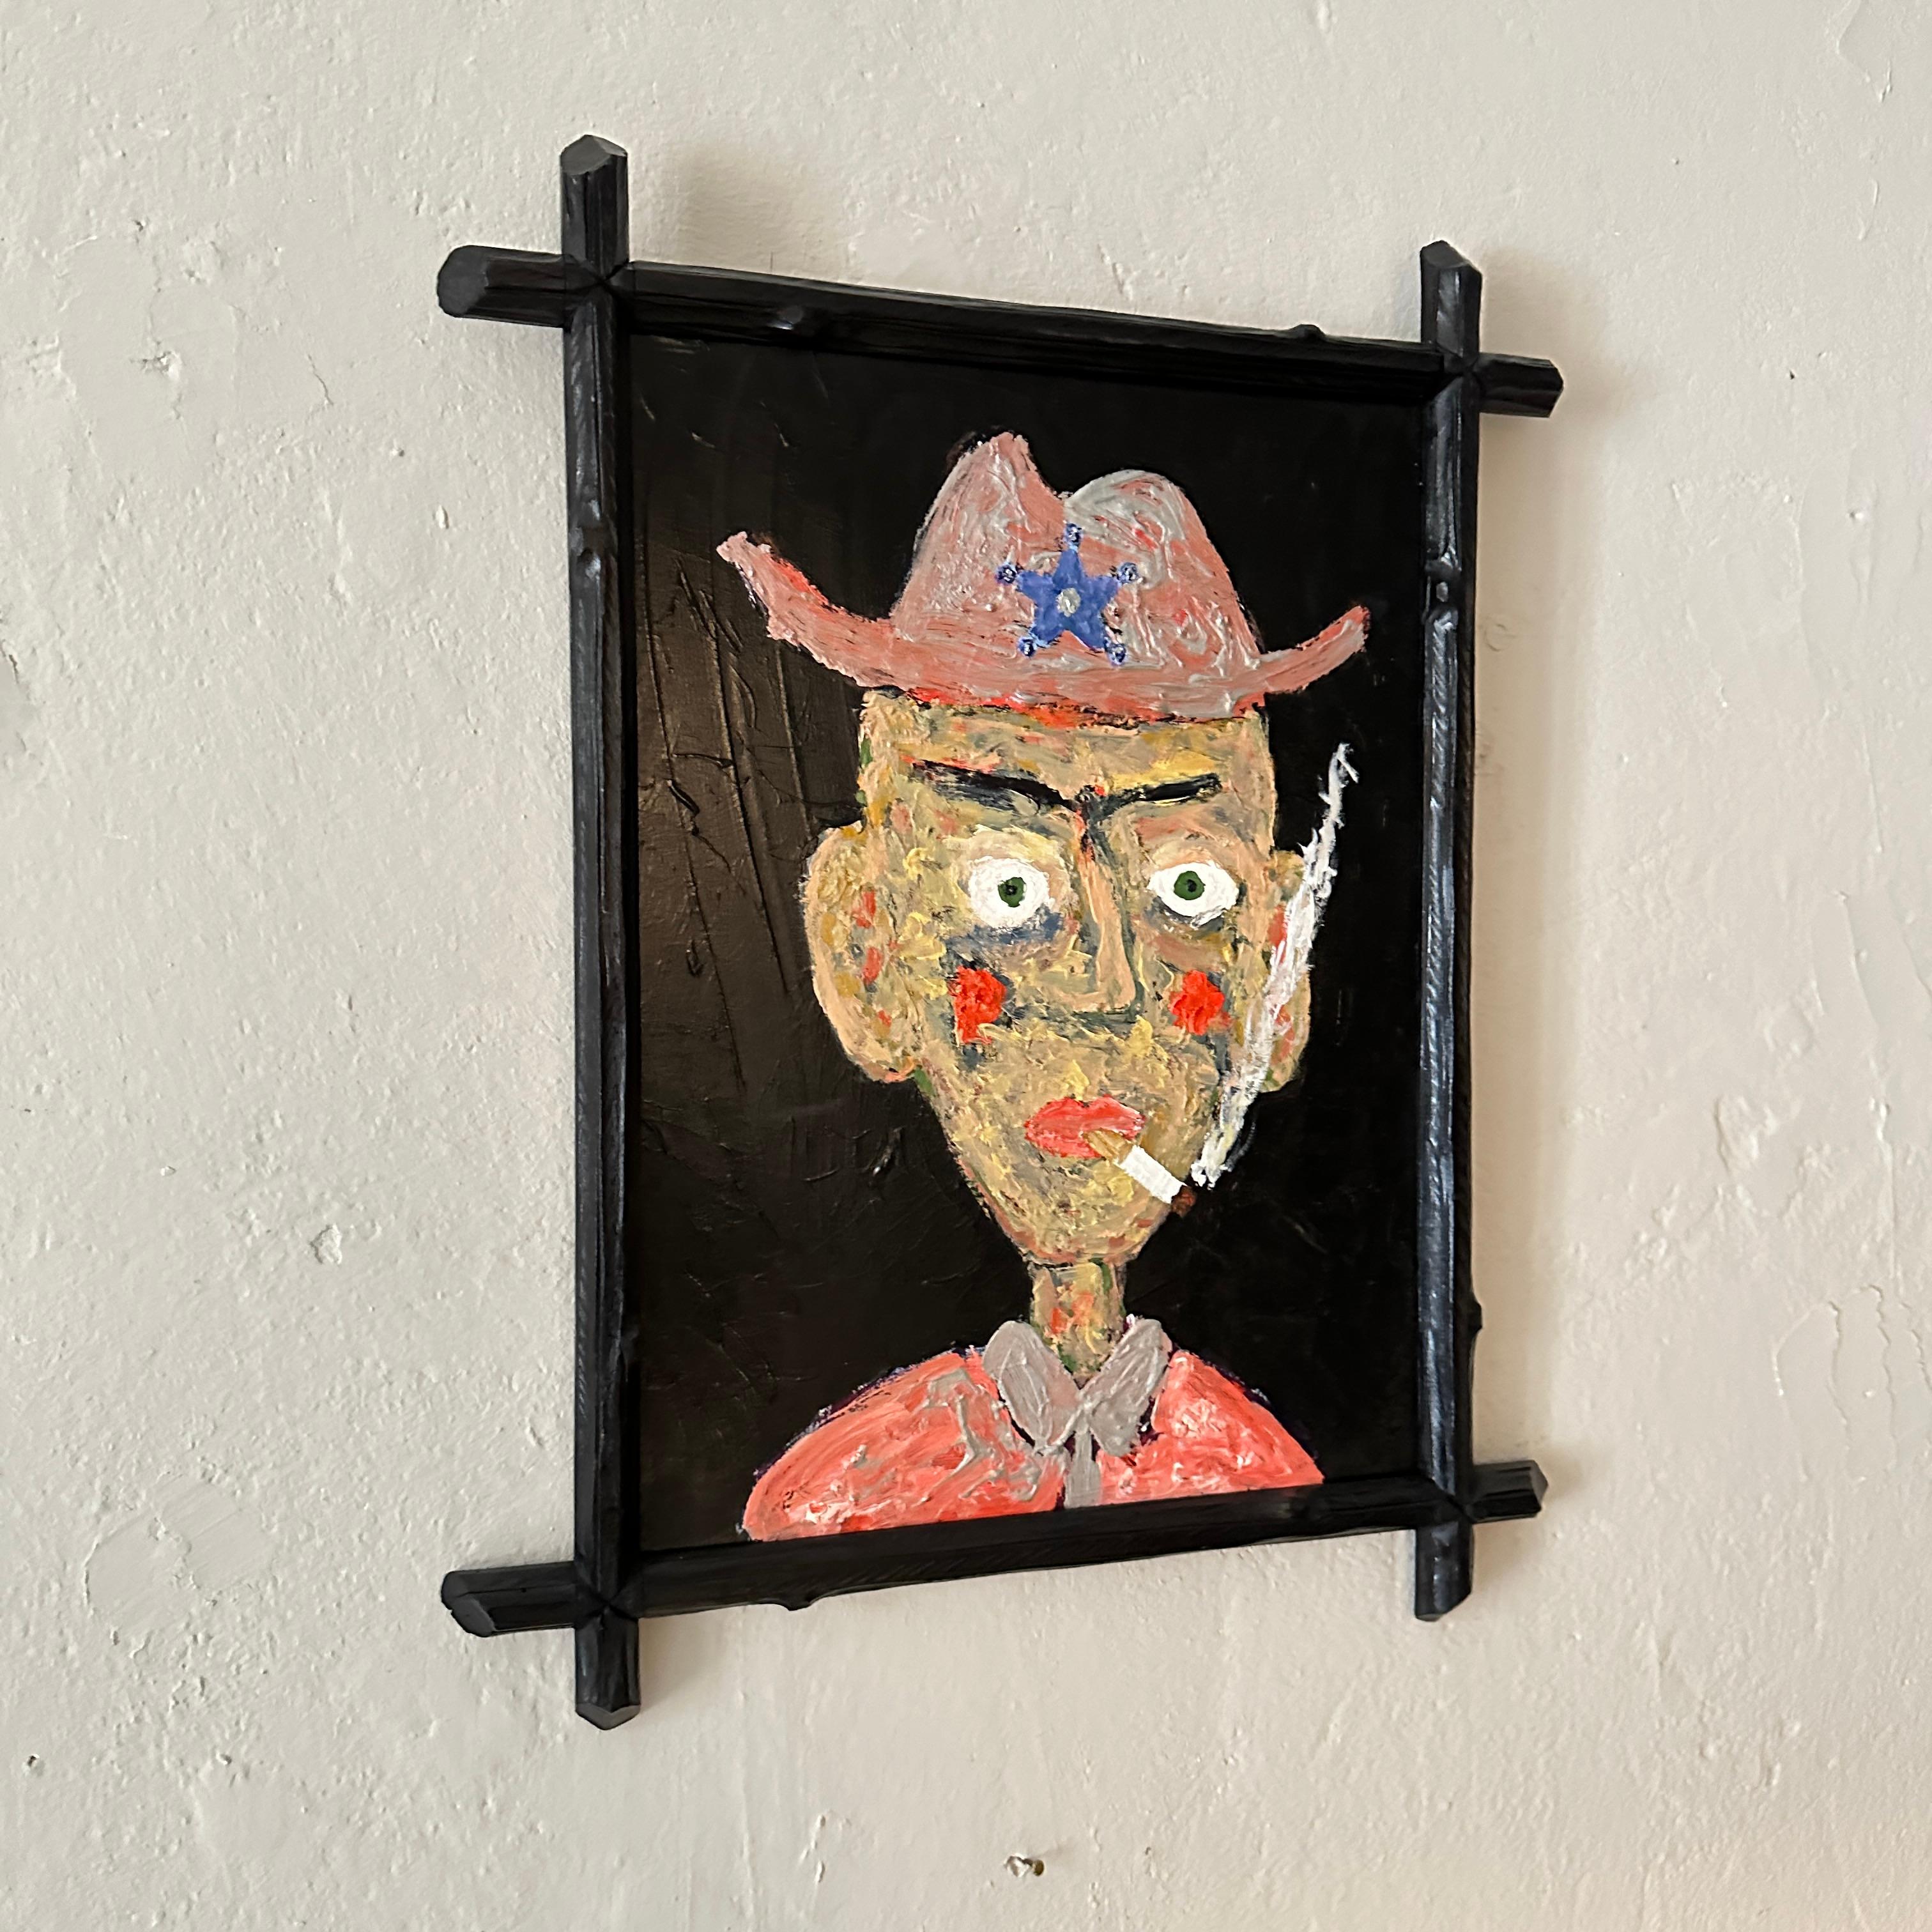 Modern Contemporary Portrait Painting of a Cowboy in Multicolored Acryl Paint on Wood